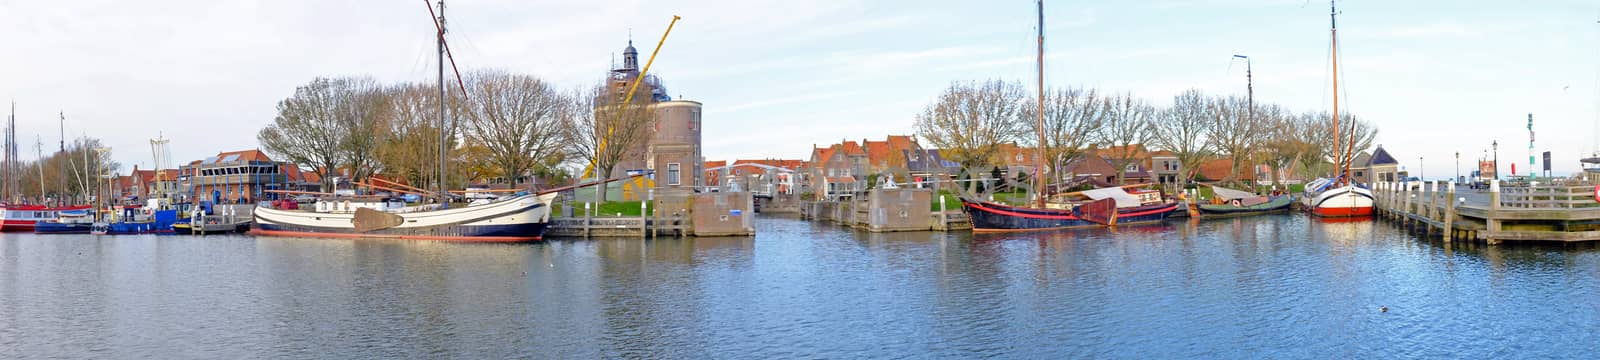 Panorama from the harbor from Enkhuizen in the Netherlands by devy